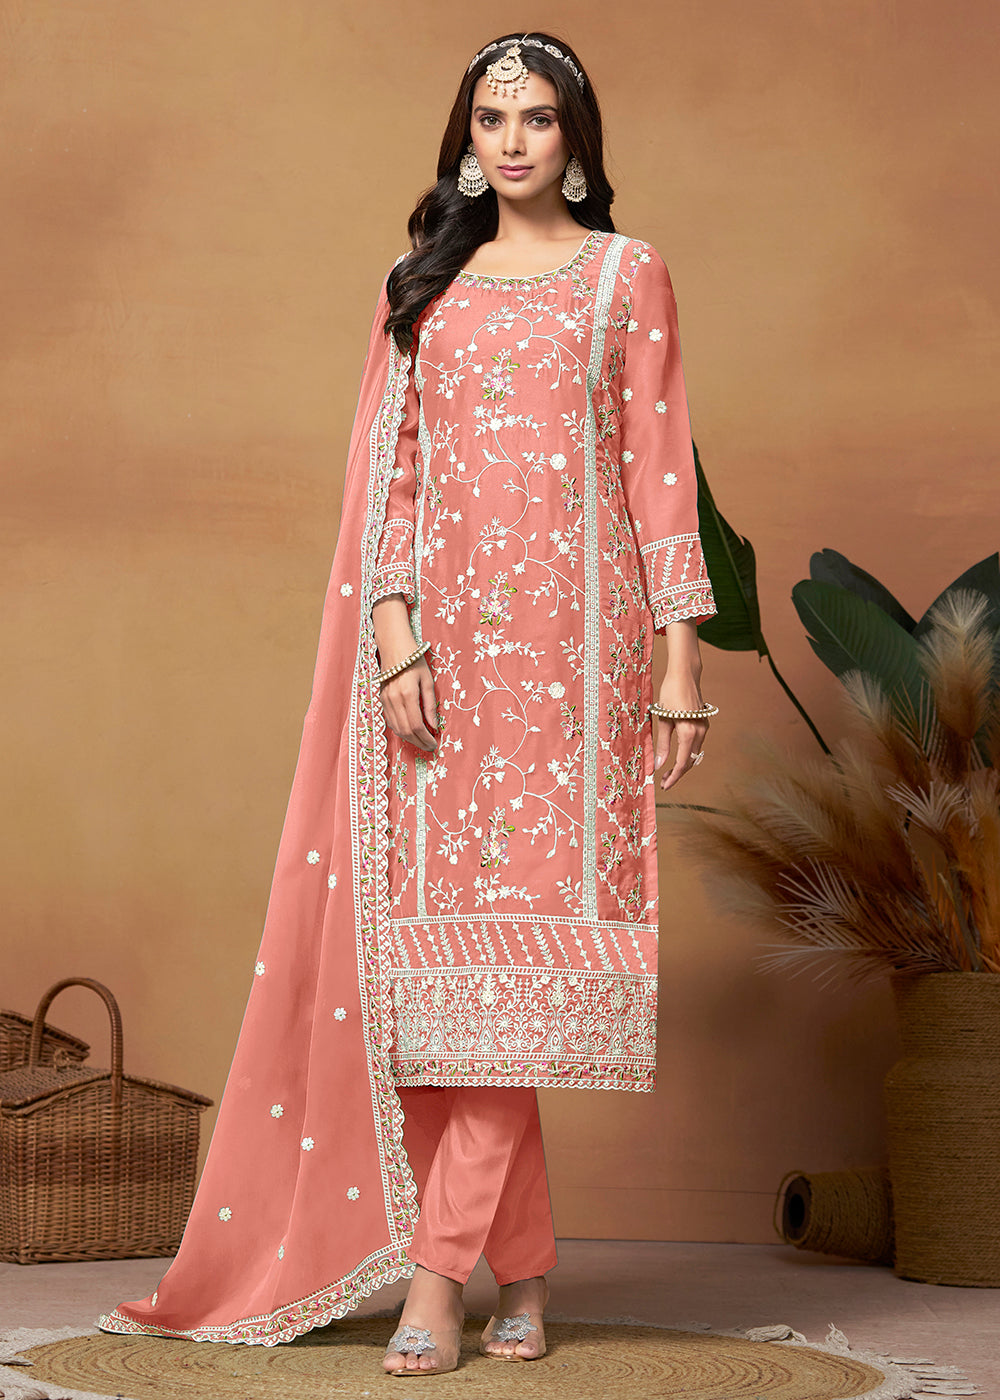 Buy Now Pakistani Style Peach Embroidered Organza Salwar Suit Online in USA, UK, Canada, Germany, Australia & Worldwide at Empress Clothing.